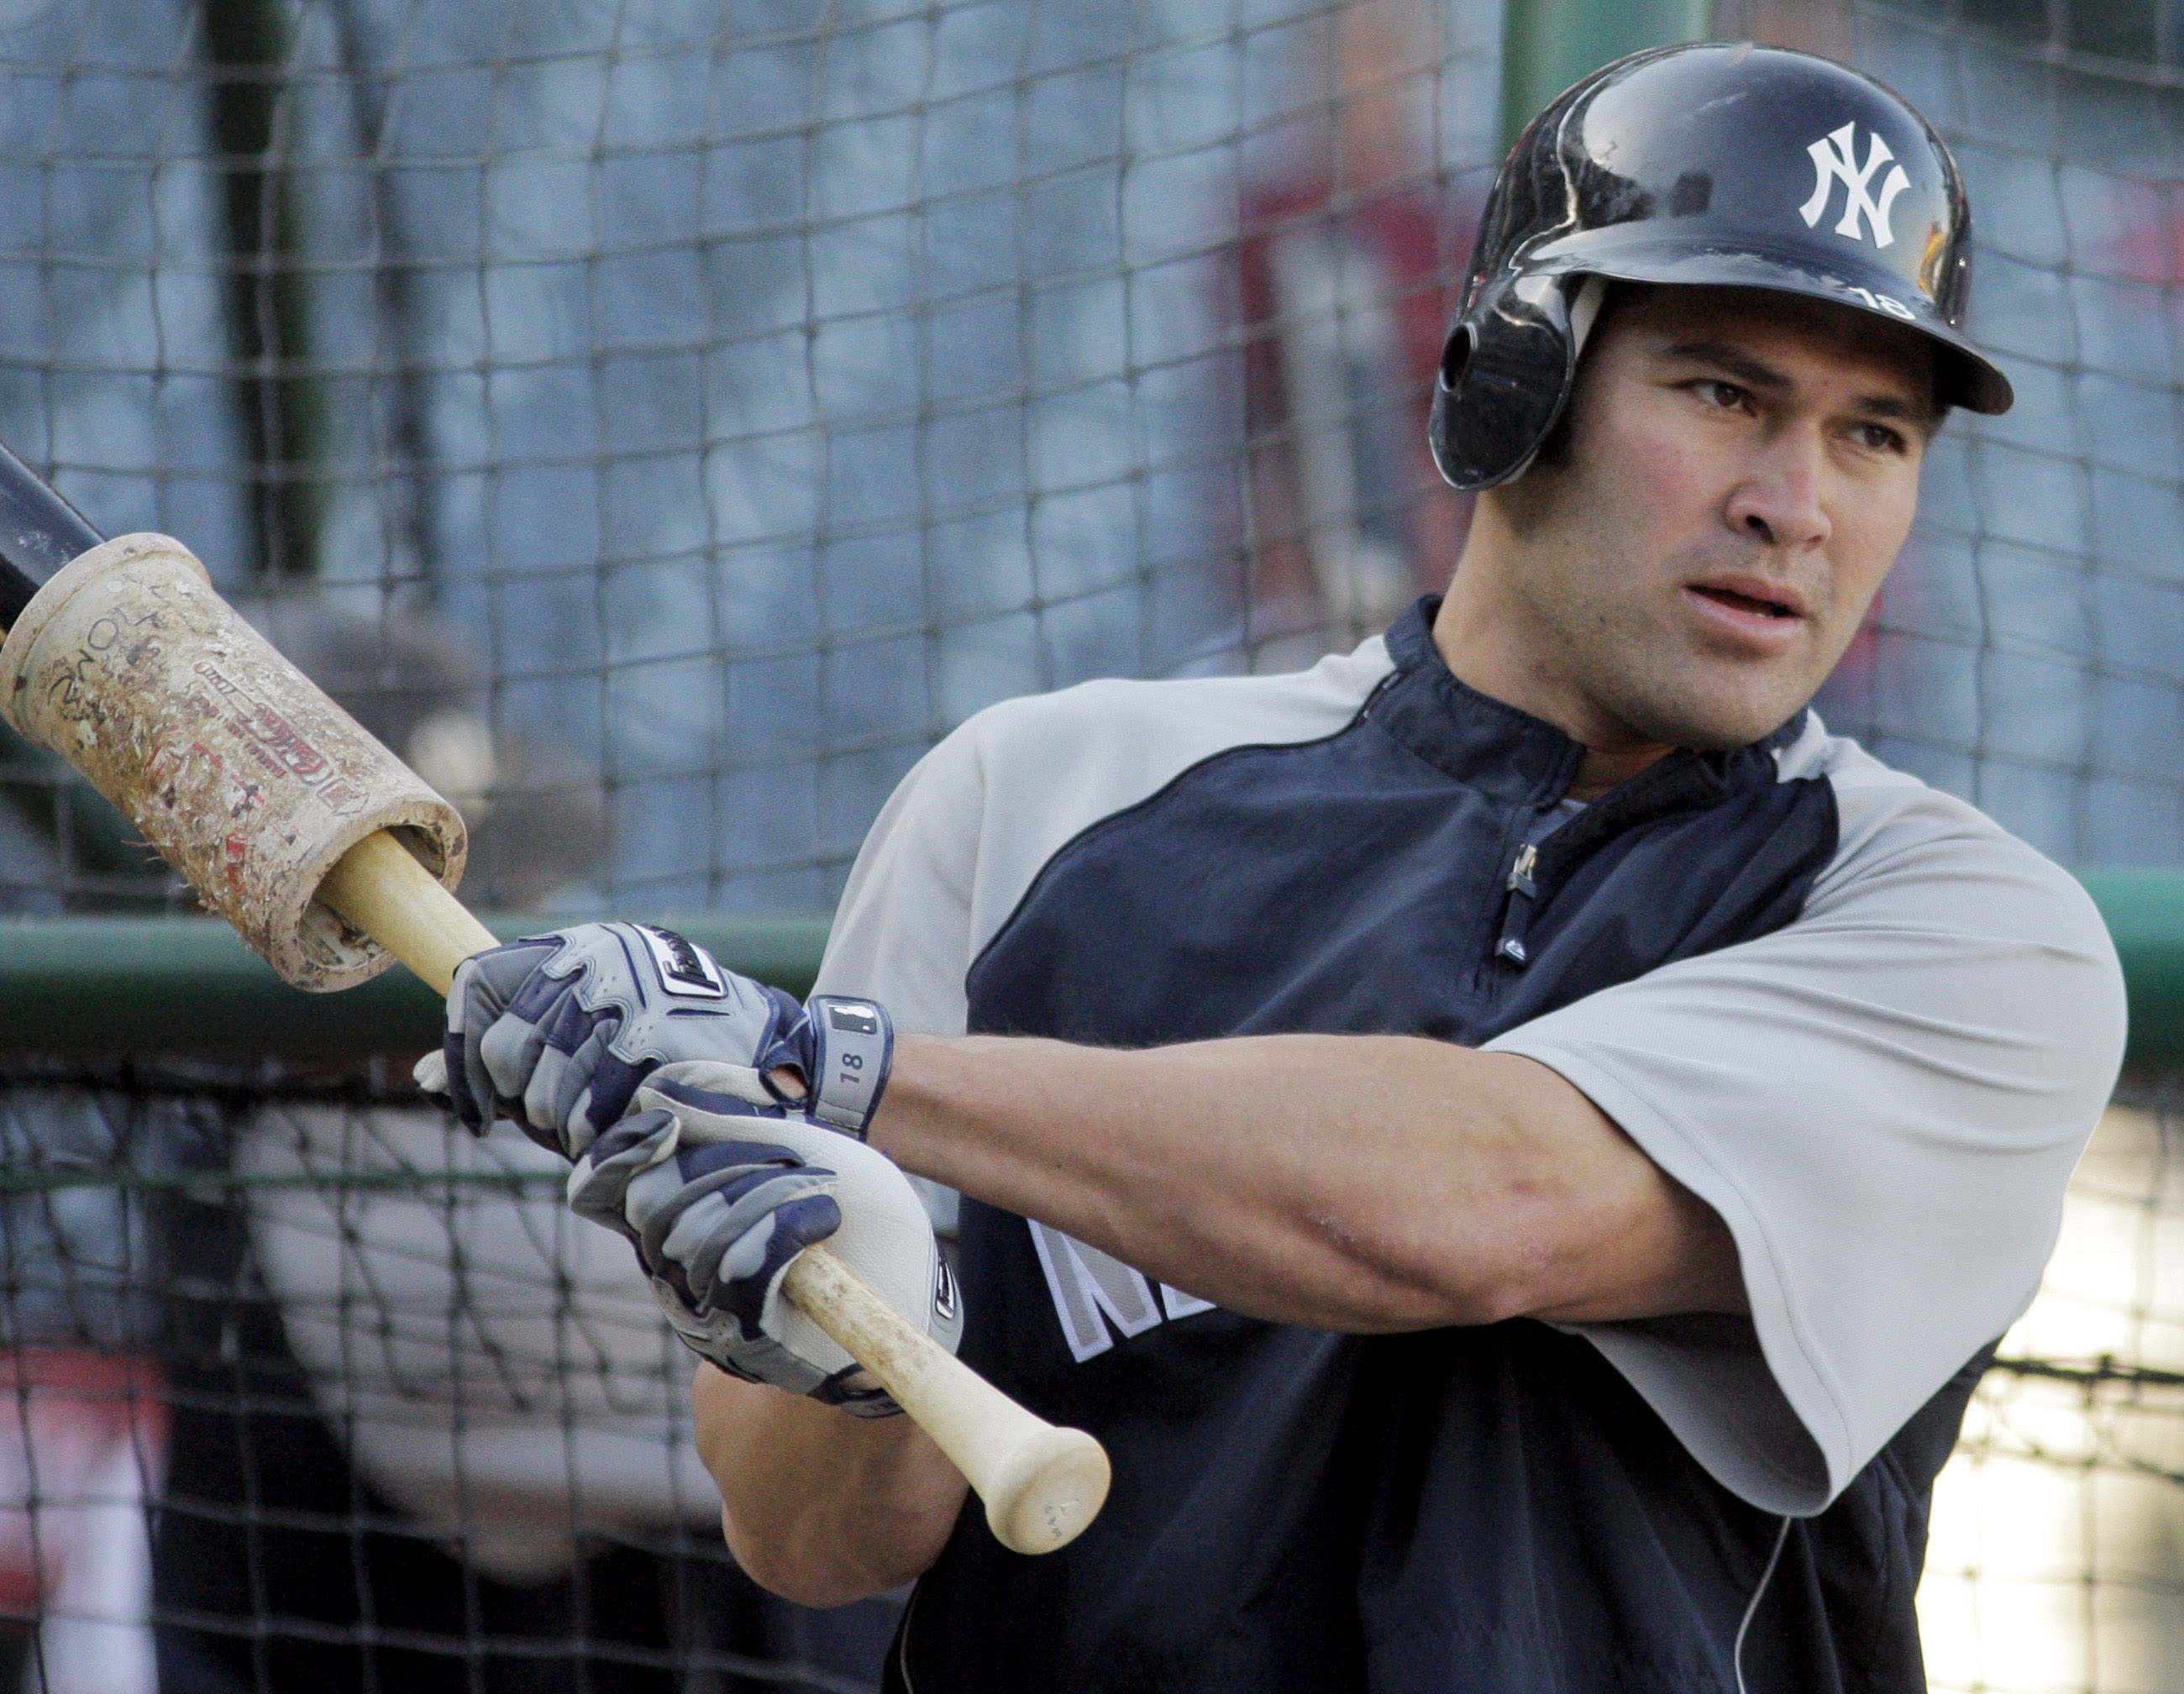 Ex-Yankees outfielder Johnny Damon arrested for DUI in Florida